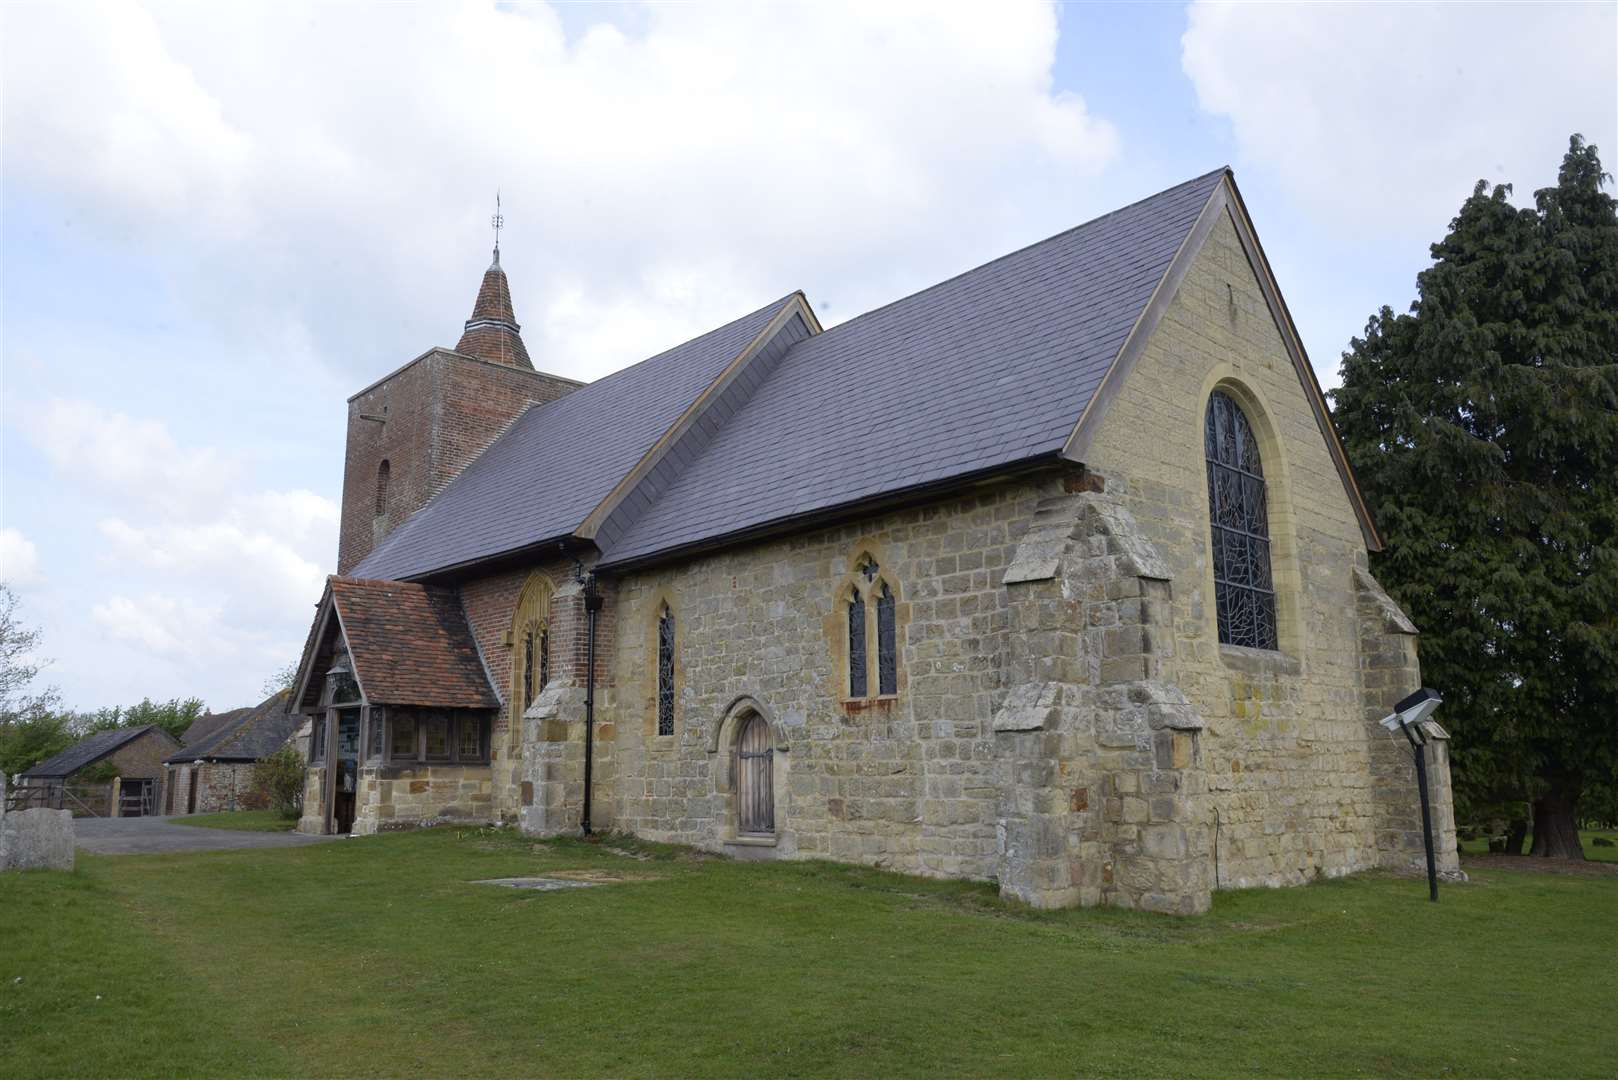 Tudeley is famous for its tiny All Saints Church, which has stained glass windows designed by Marc Chagall